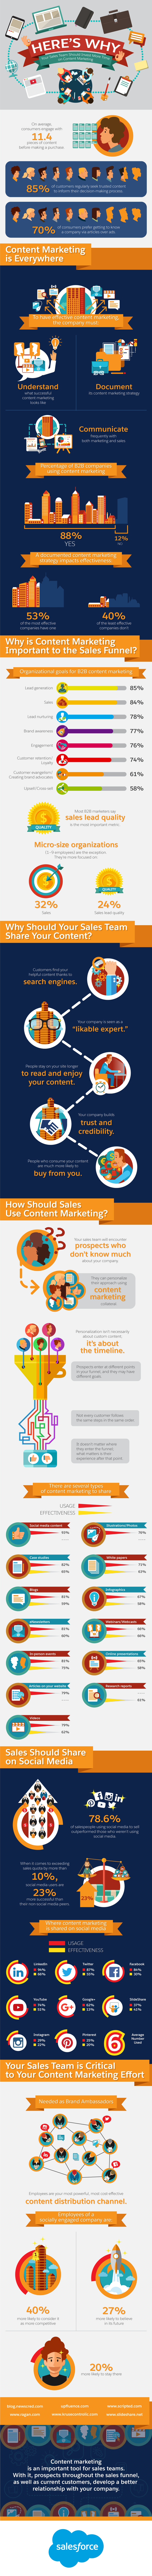 Here's Why Your Sales Team Should Invest More Time on Content Marketing [Infographic]